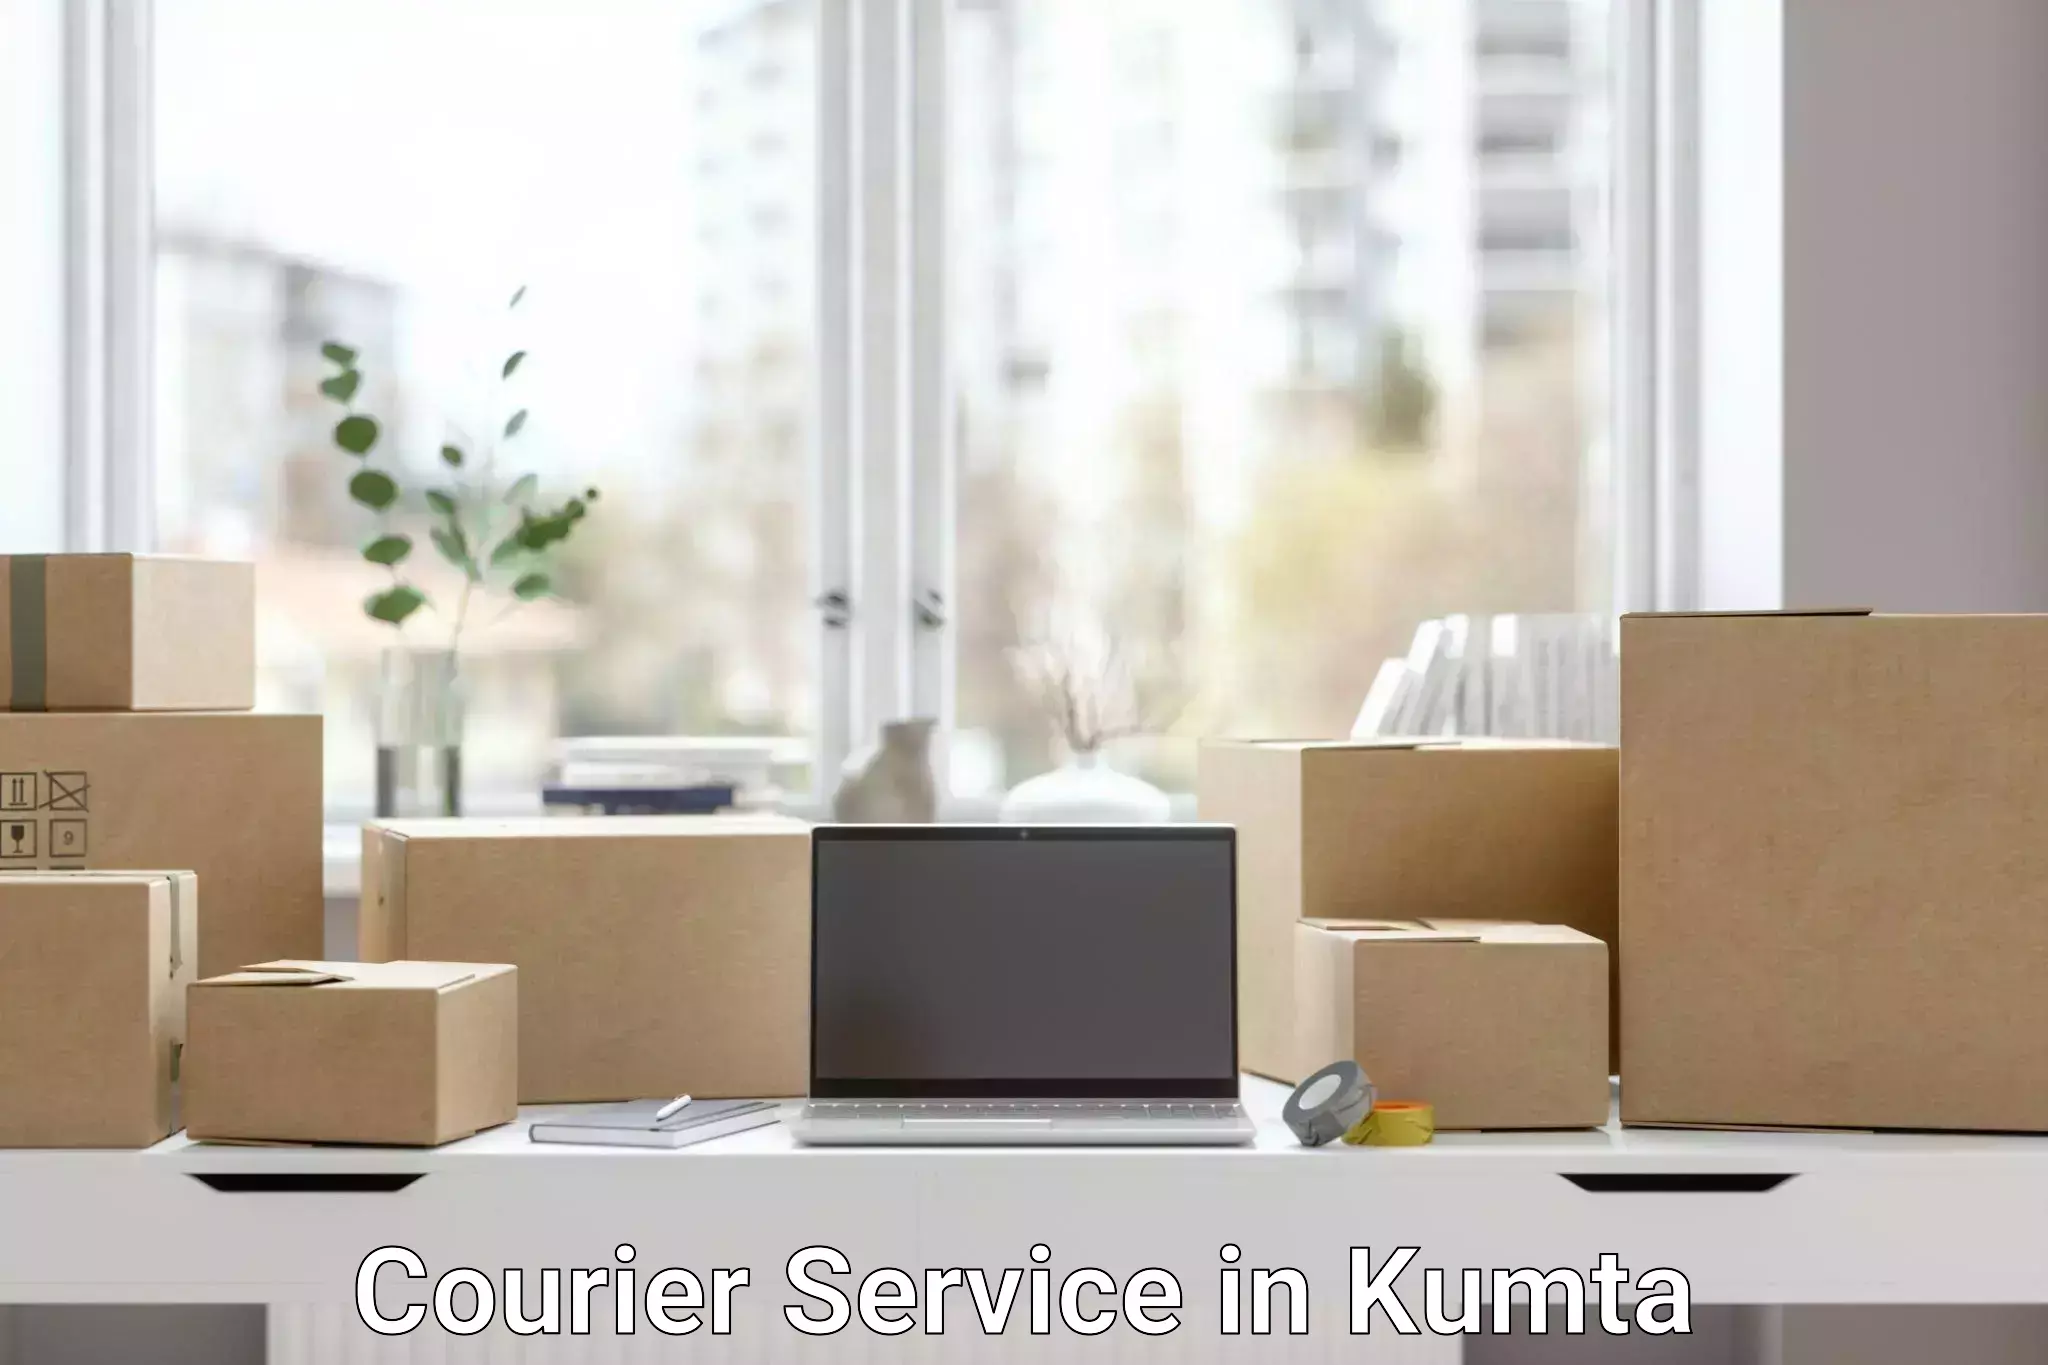 Automated parcel services in Kumta